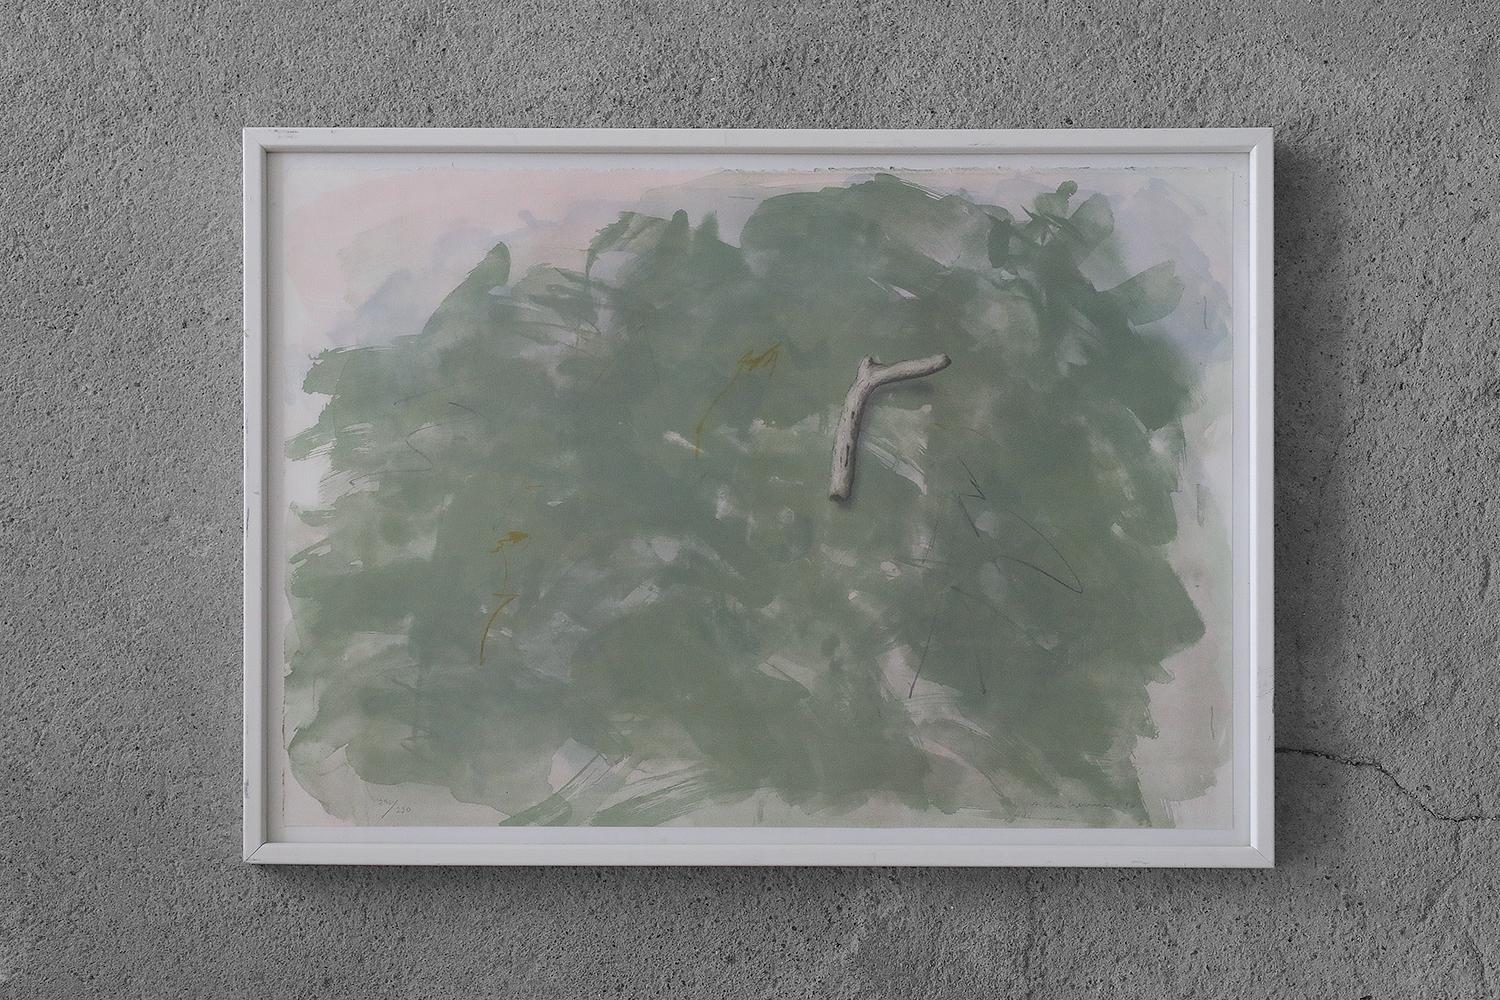 Lennart Aschenbrenner, Composition with stick, 1986
Color lithography
Number 296/330
This work is signed by the artist, has date and an individual number (pencil)
Sheet dimensions 49/68
Framed work

Lennart Aschenbrenner is a Swedish artist born in